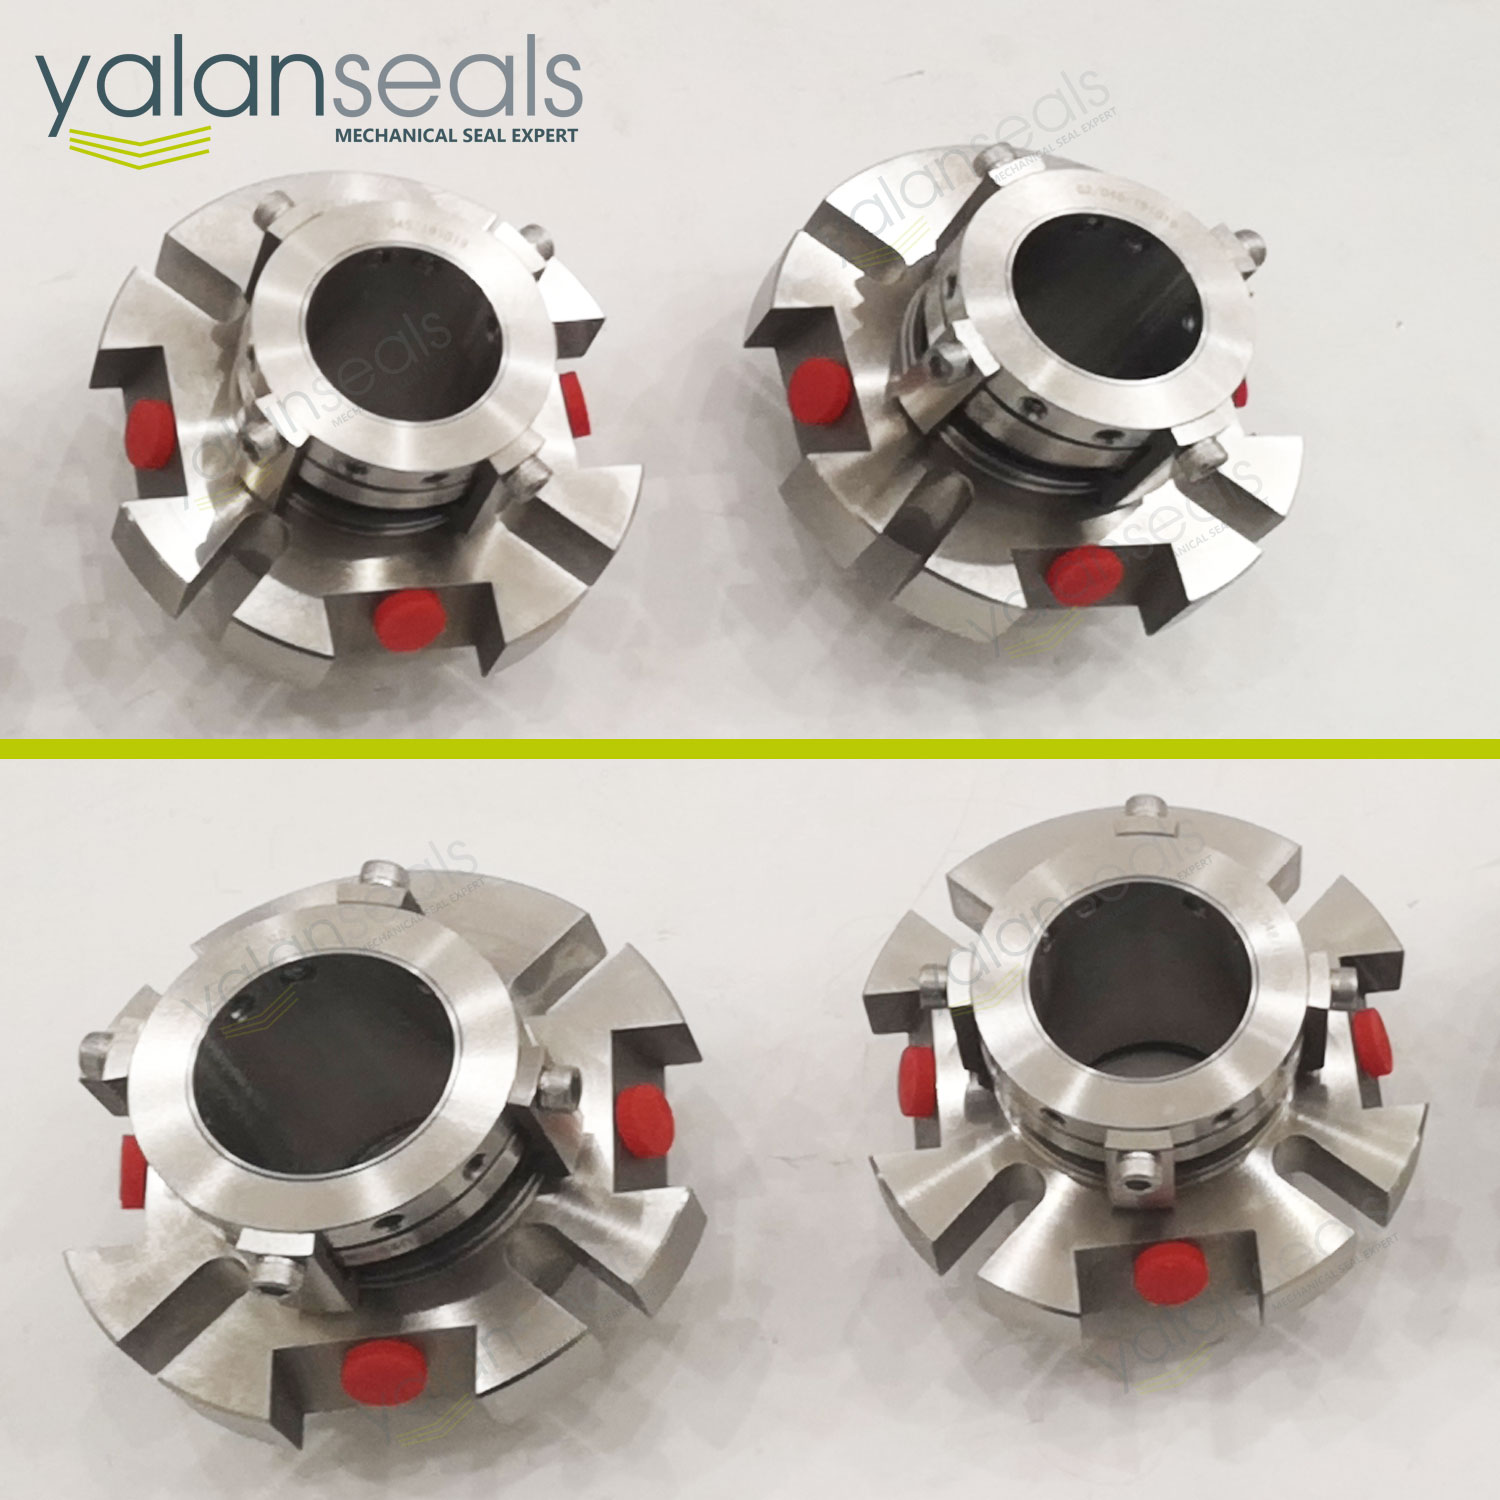 YALAN Retrofit Mechanical Seals for AES CDPN Double Cartridge Seals for Pulp Pumps and Chemical Pumps